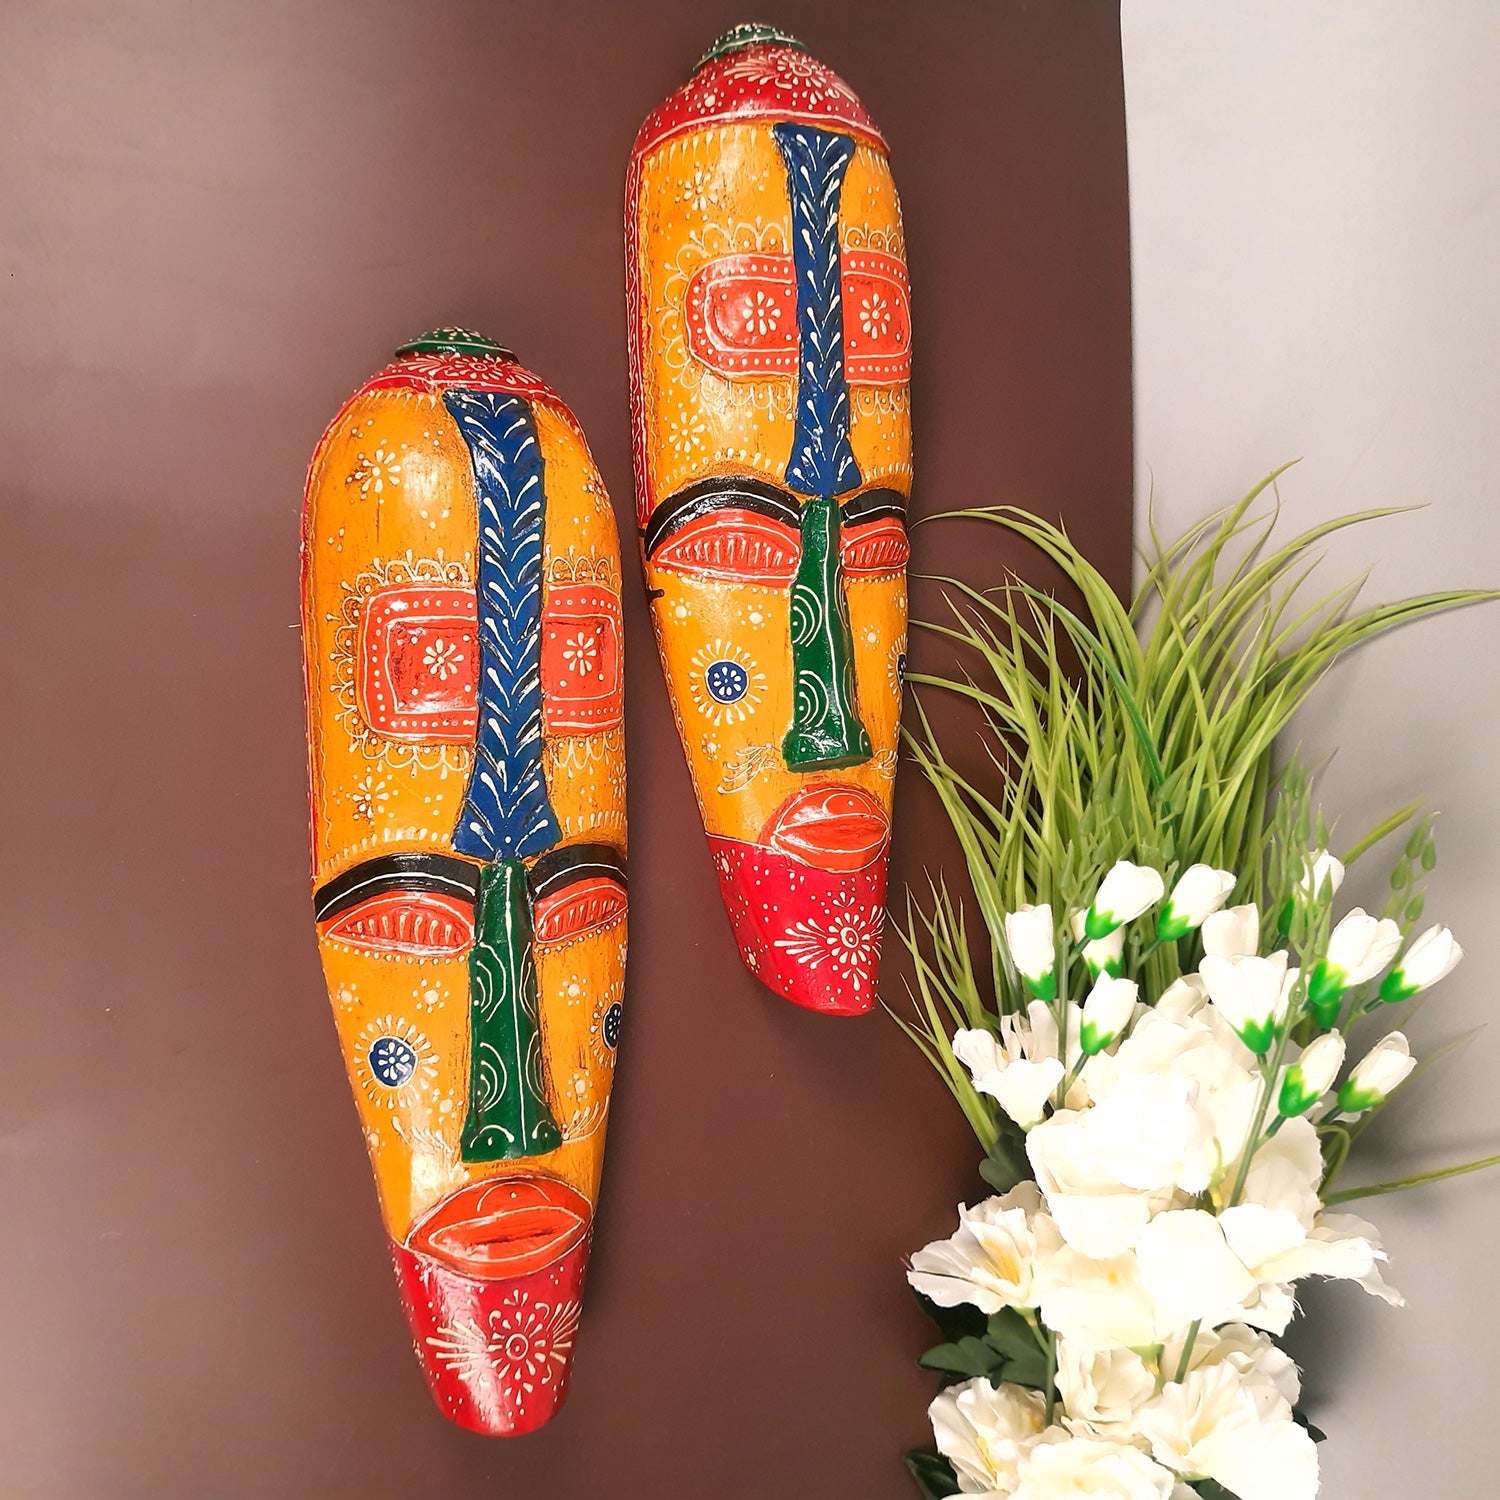 Wall Mask Wooden Hangings | Nazar Battu For Home Entrance | African Egyptian Masks Face Hanging Tall - For Living Room, House, Door, Hall-Way, Balcony Decoration - 18 Inch - Apkamart #style_Pack of 2